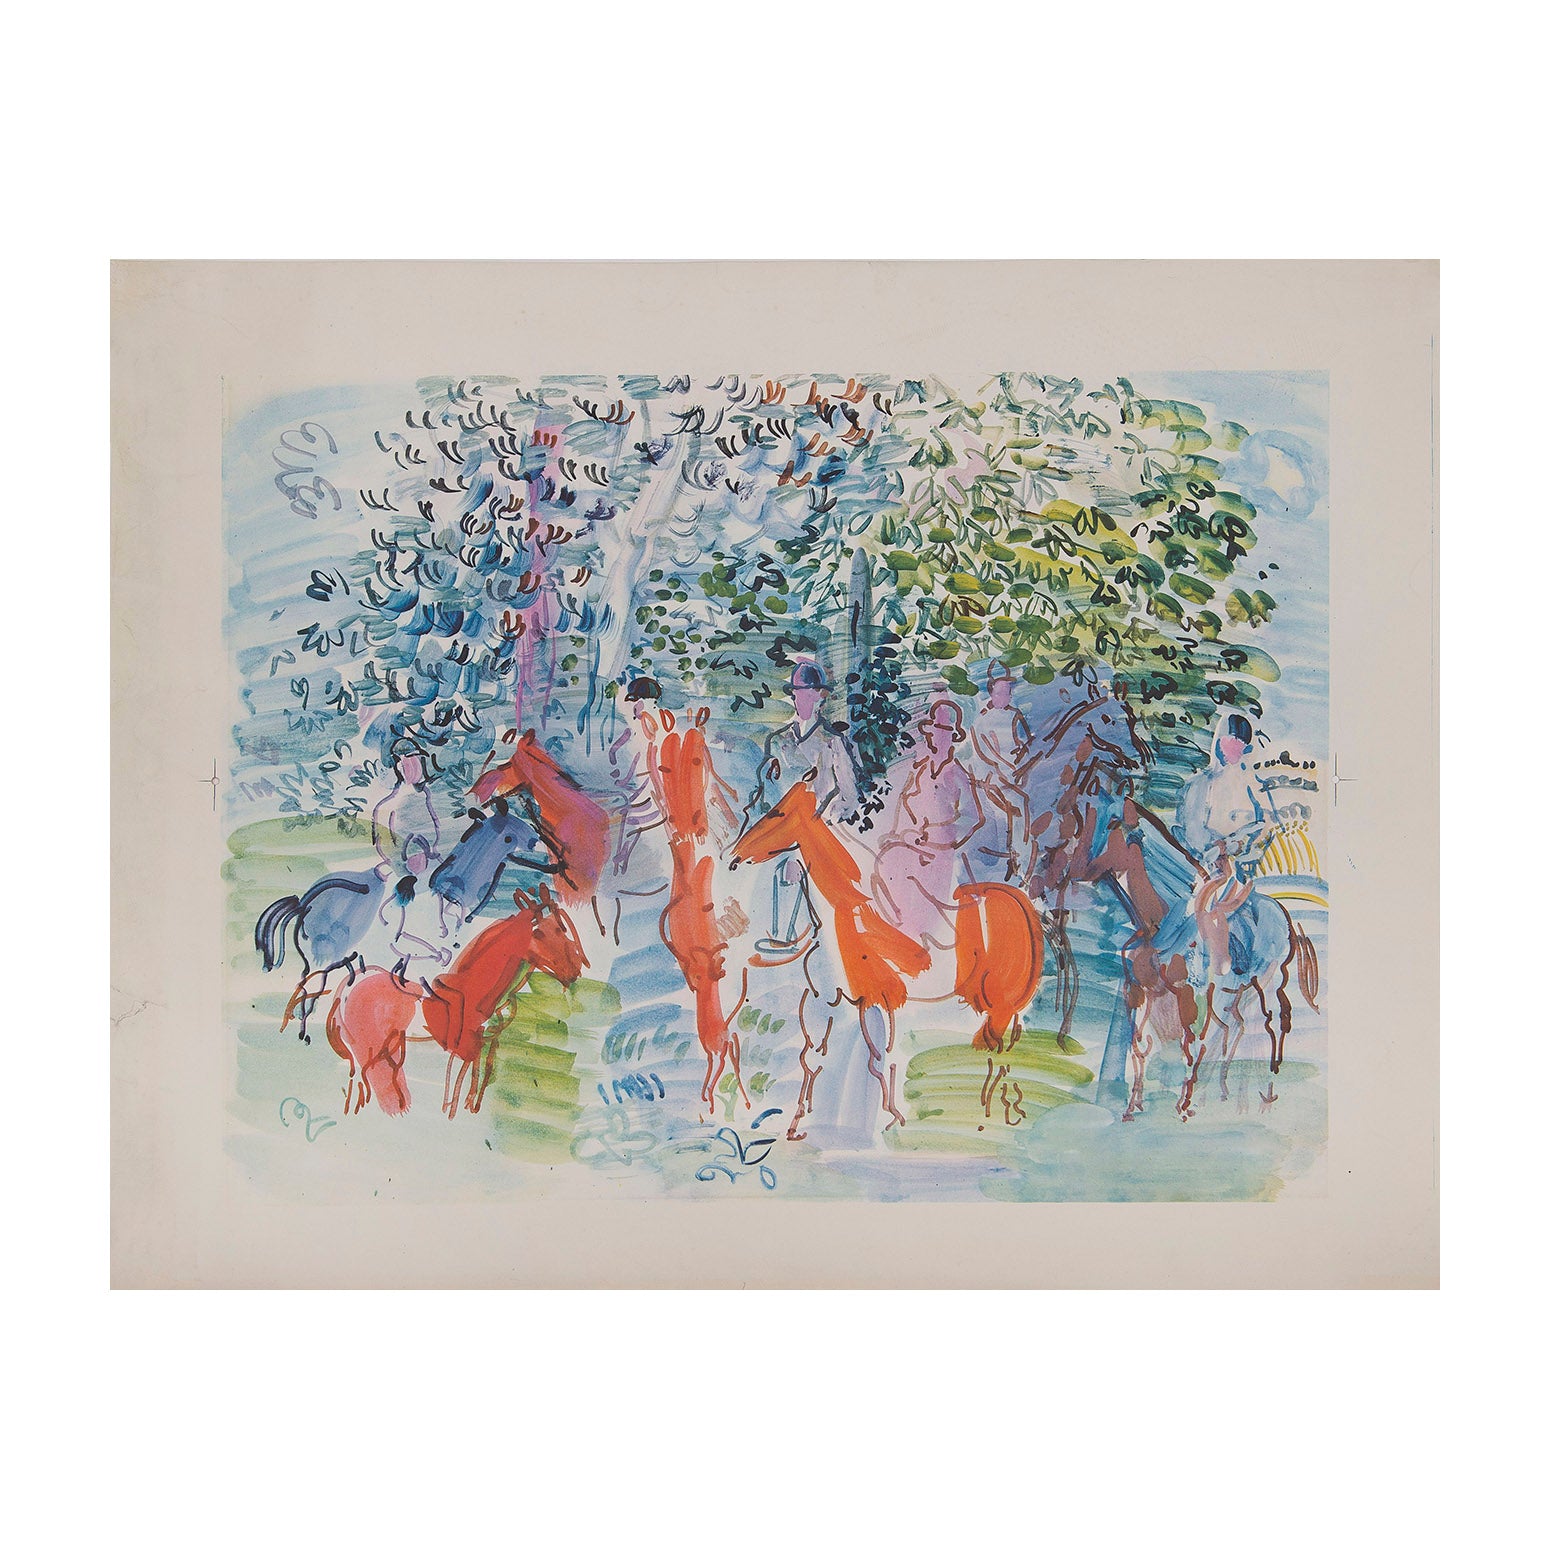 An original 1950s print, The Kessler Family on Horseback, by Raoul Dufy. Printed by the Curwen Press.